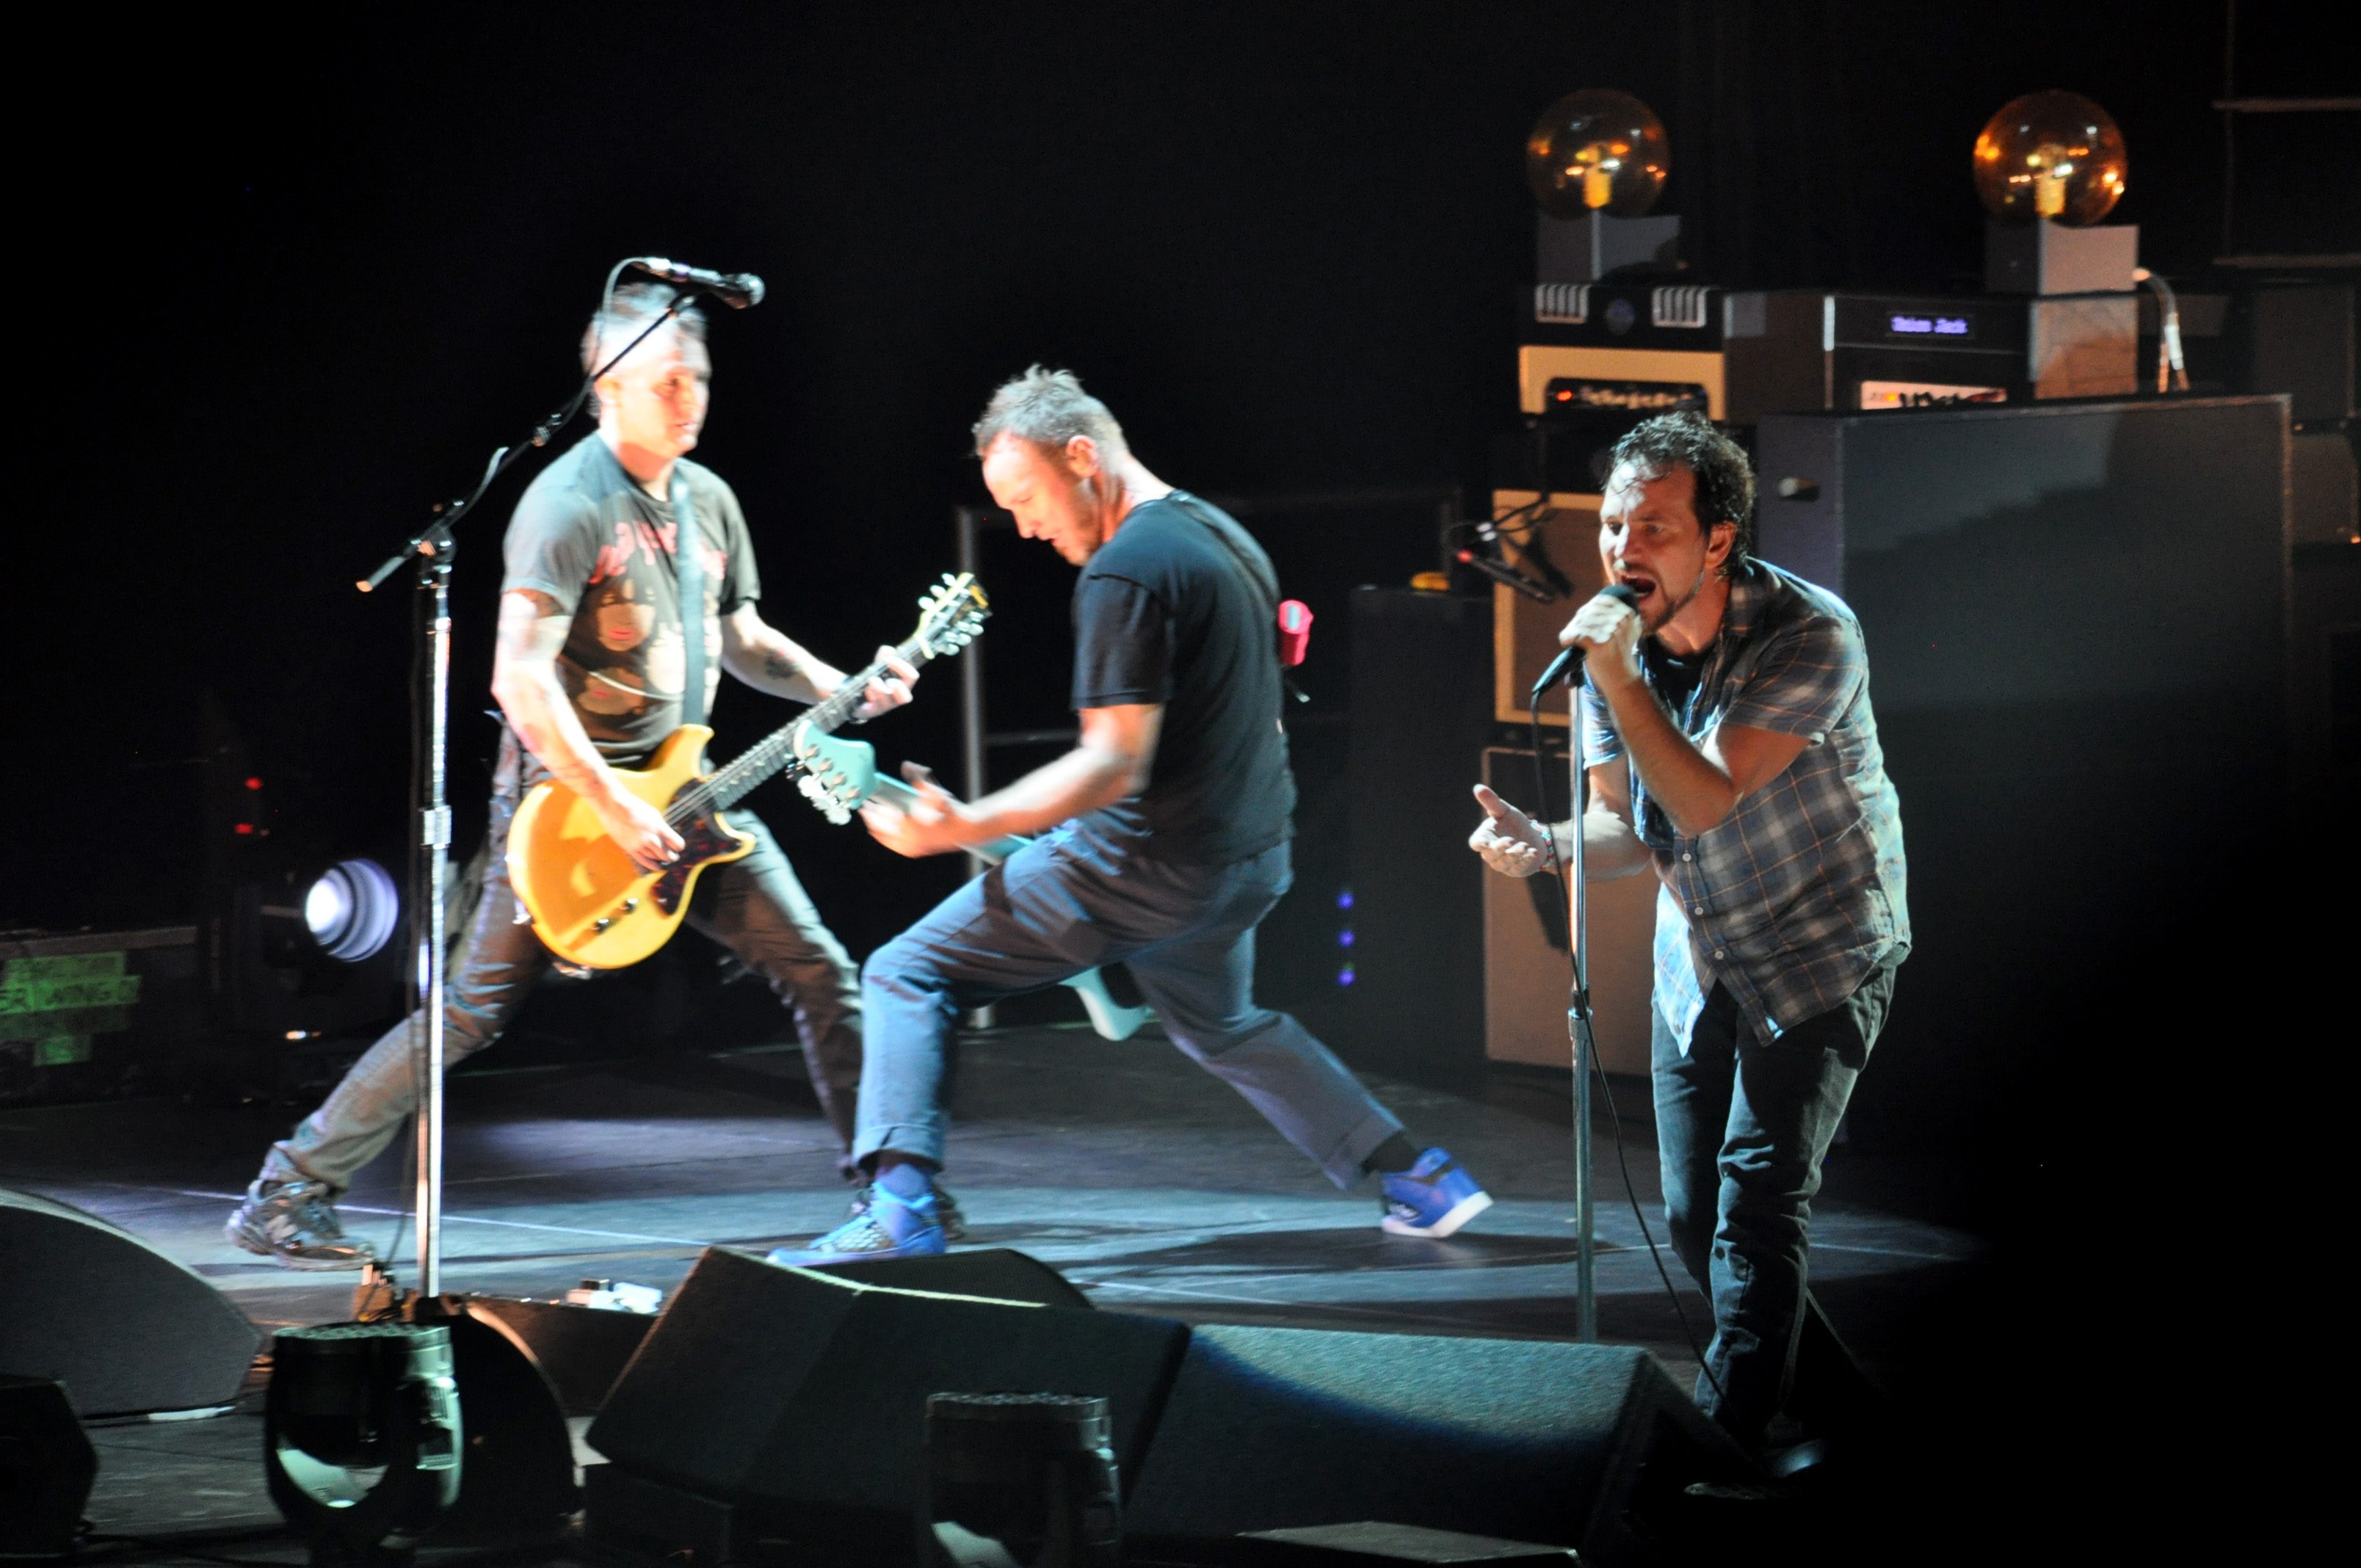 Pearl Jam To Release Holiday Songs on Streaming Services Under "12 Days of Christmas" Program